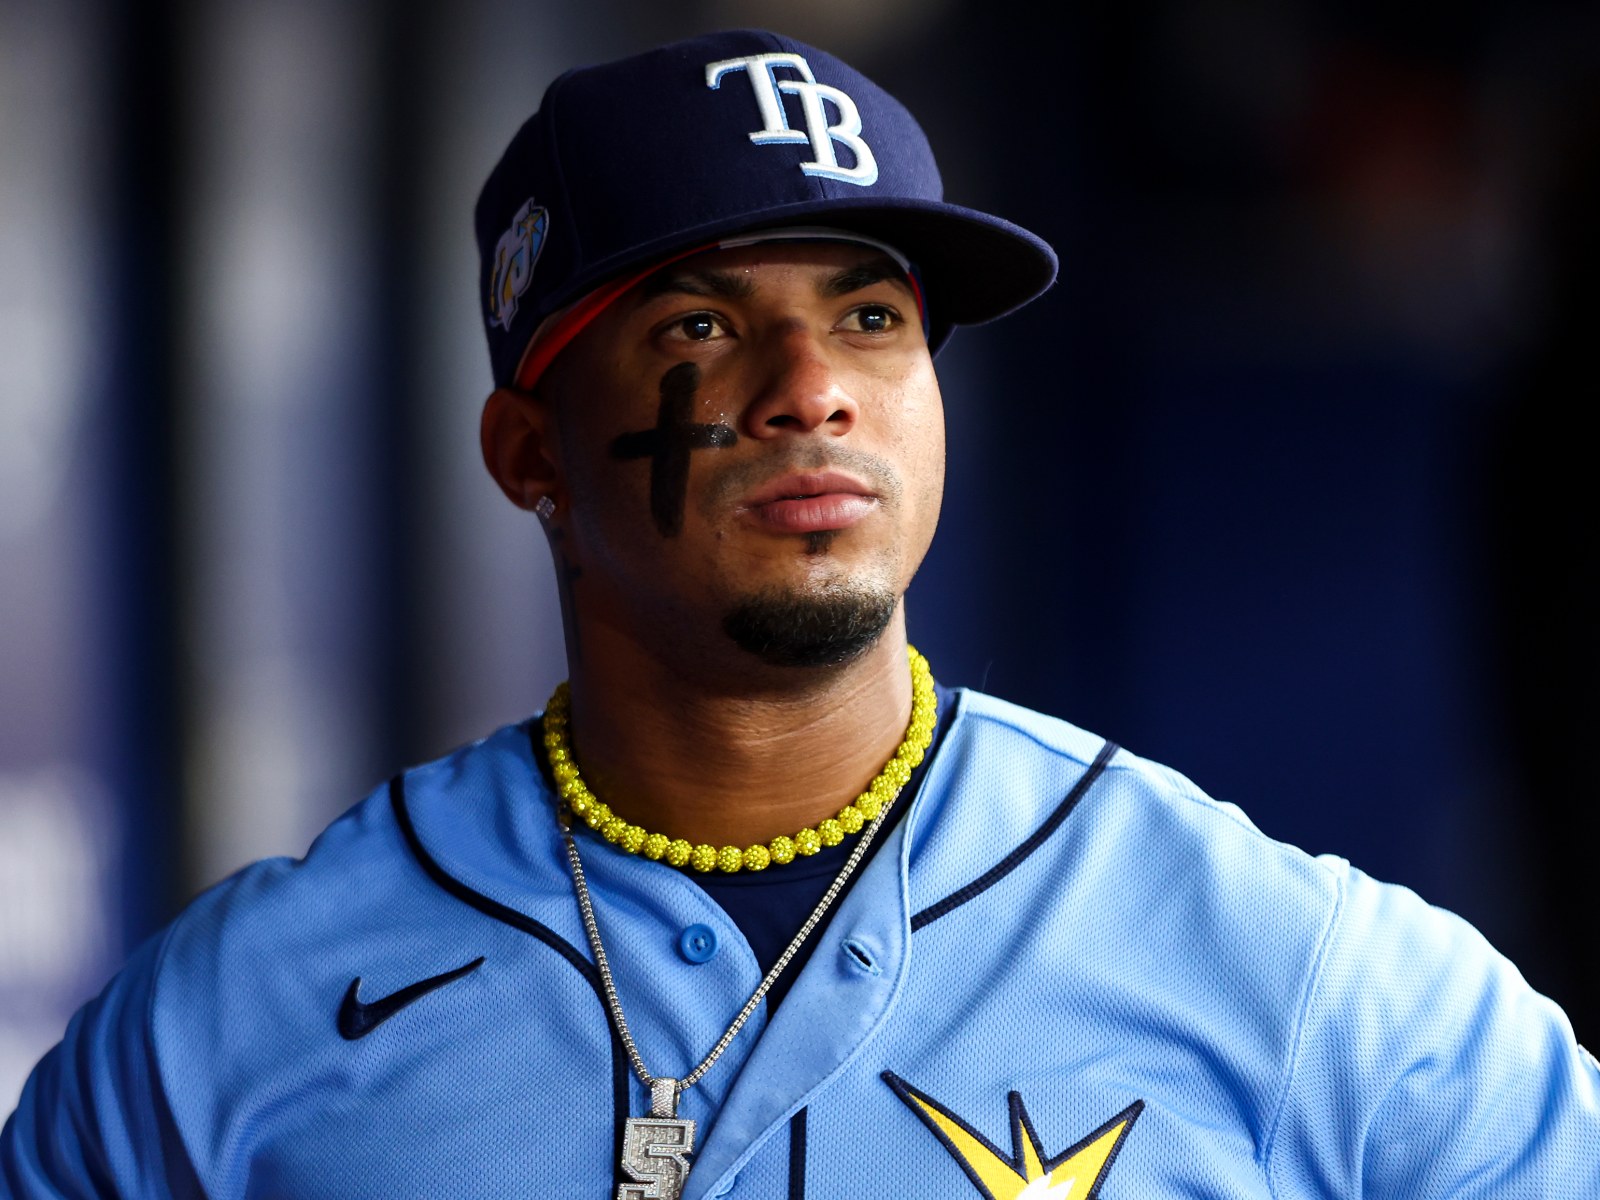 Rays Place Wander Franco on Restricted List Amid MLB Investigation